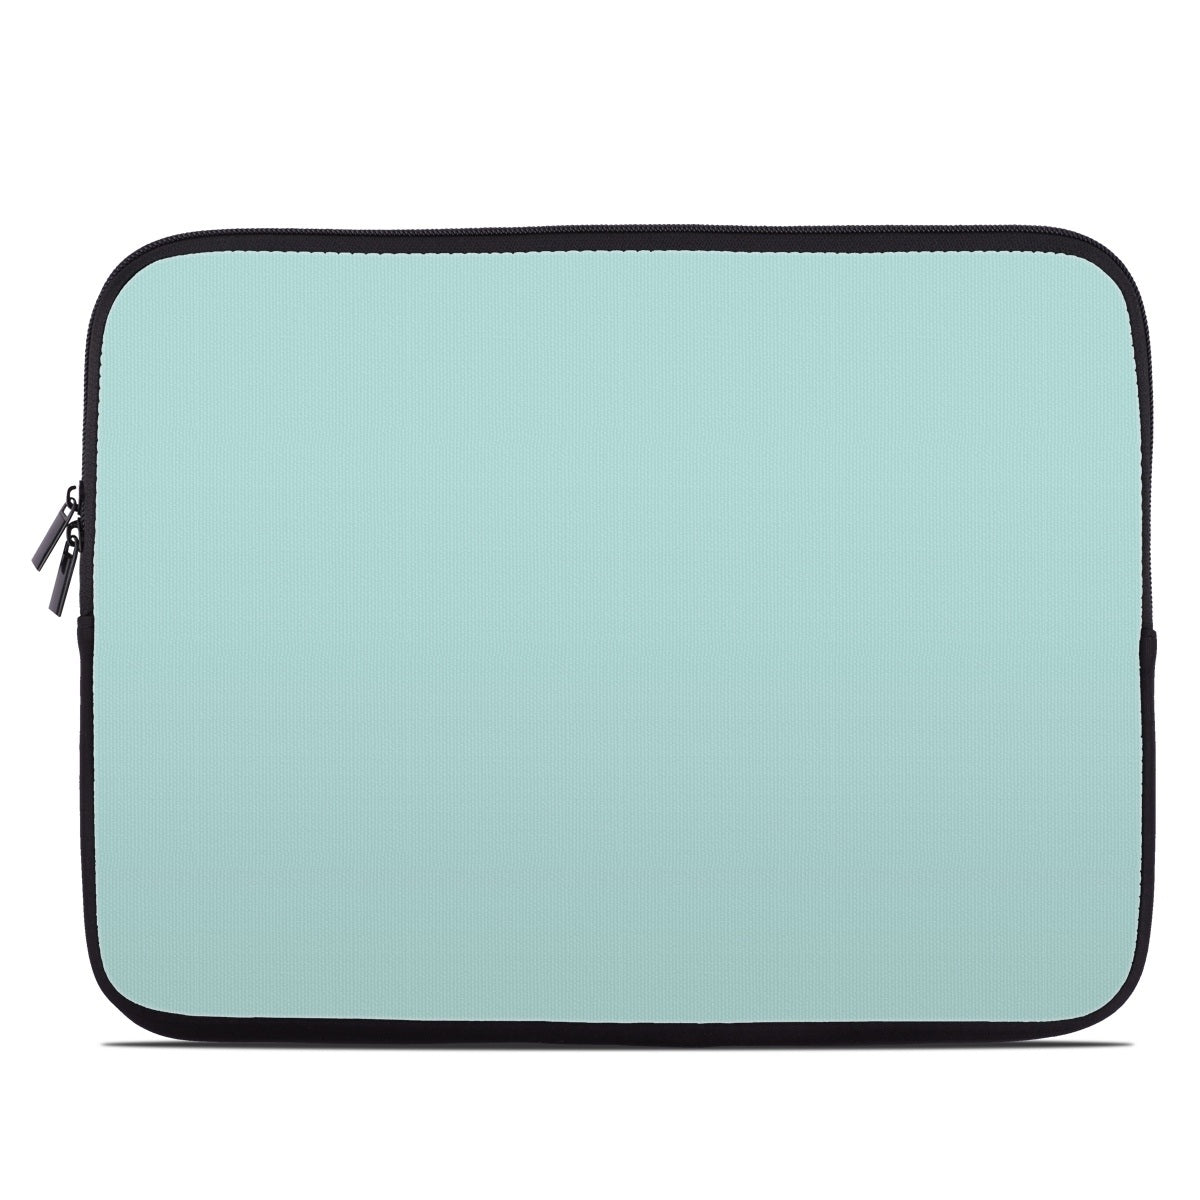 Solid State Mint - Laptop Sleeve